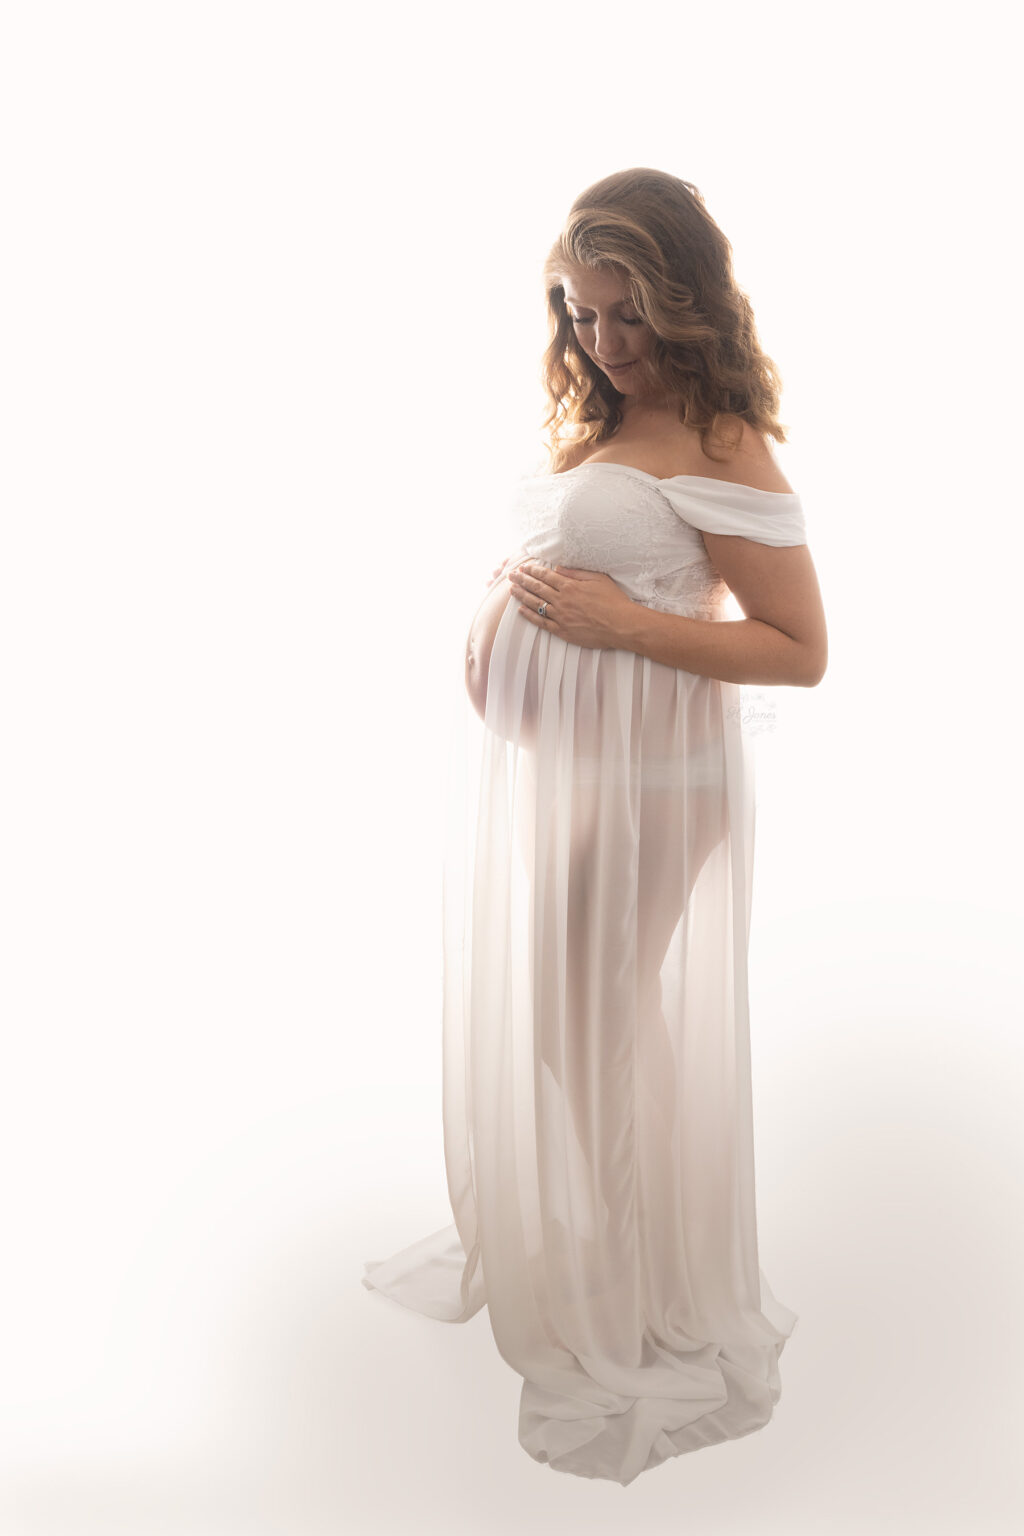 Full length backlit shot of pregnant lady in long white maternity gown.